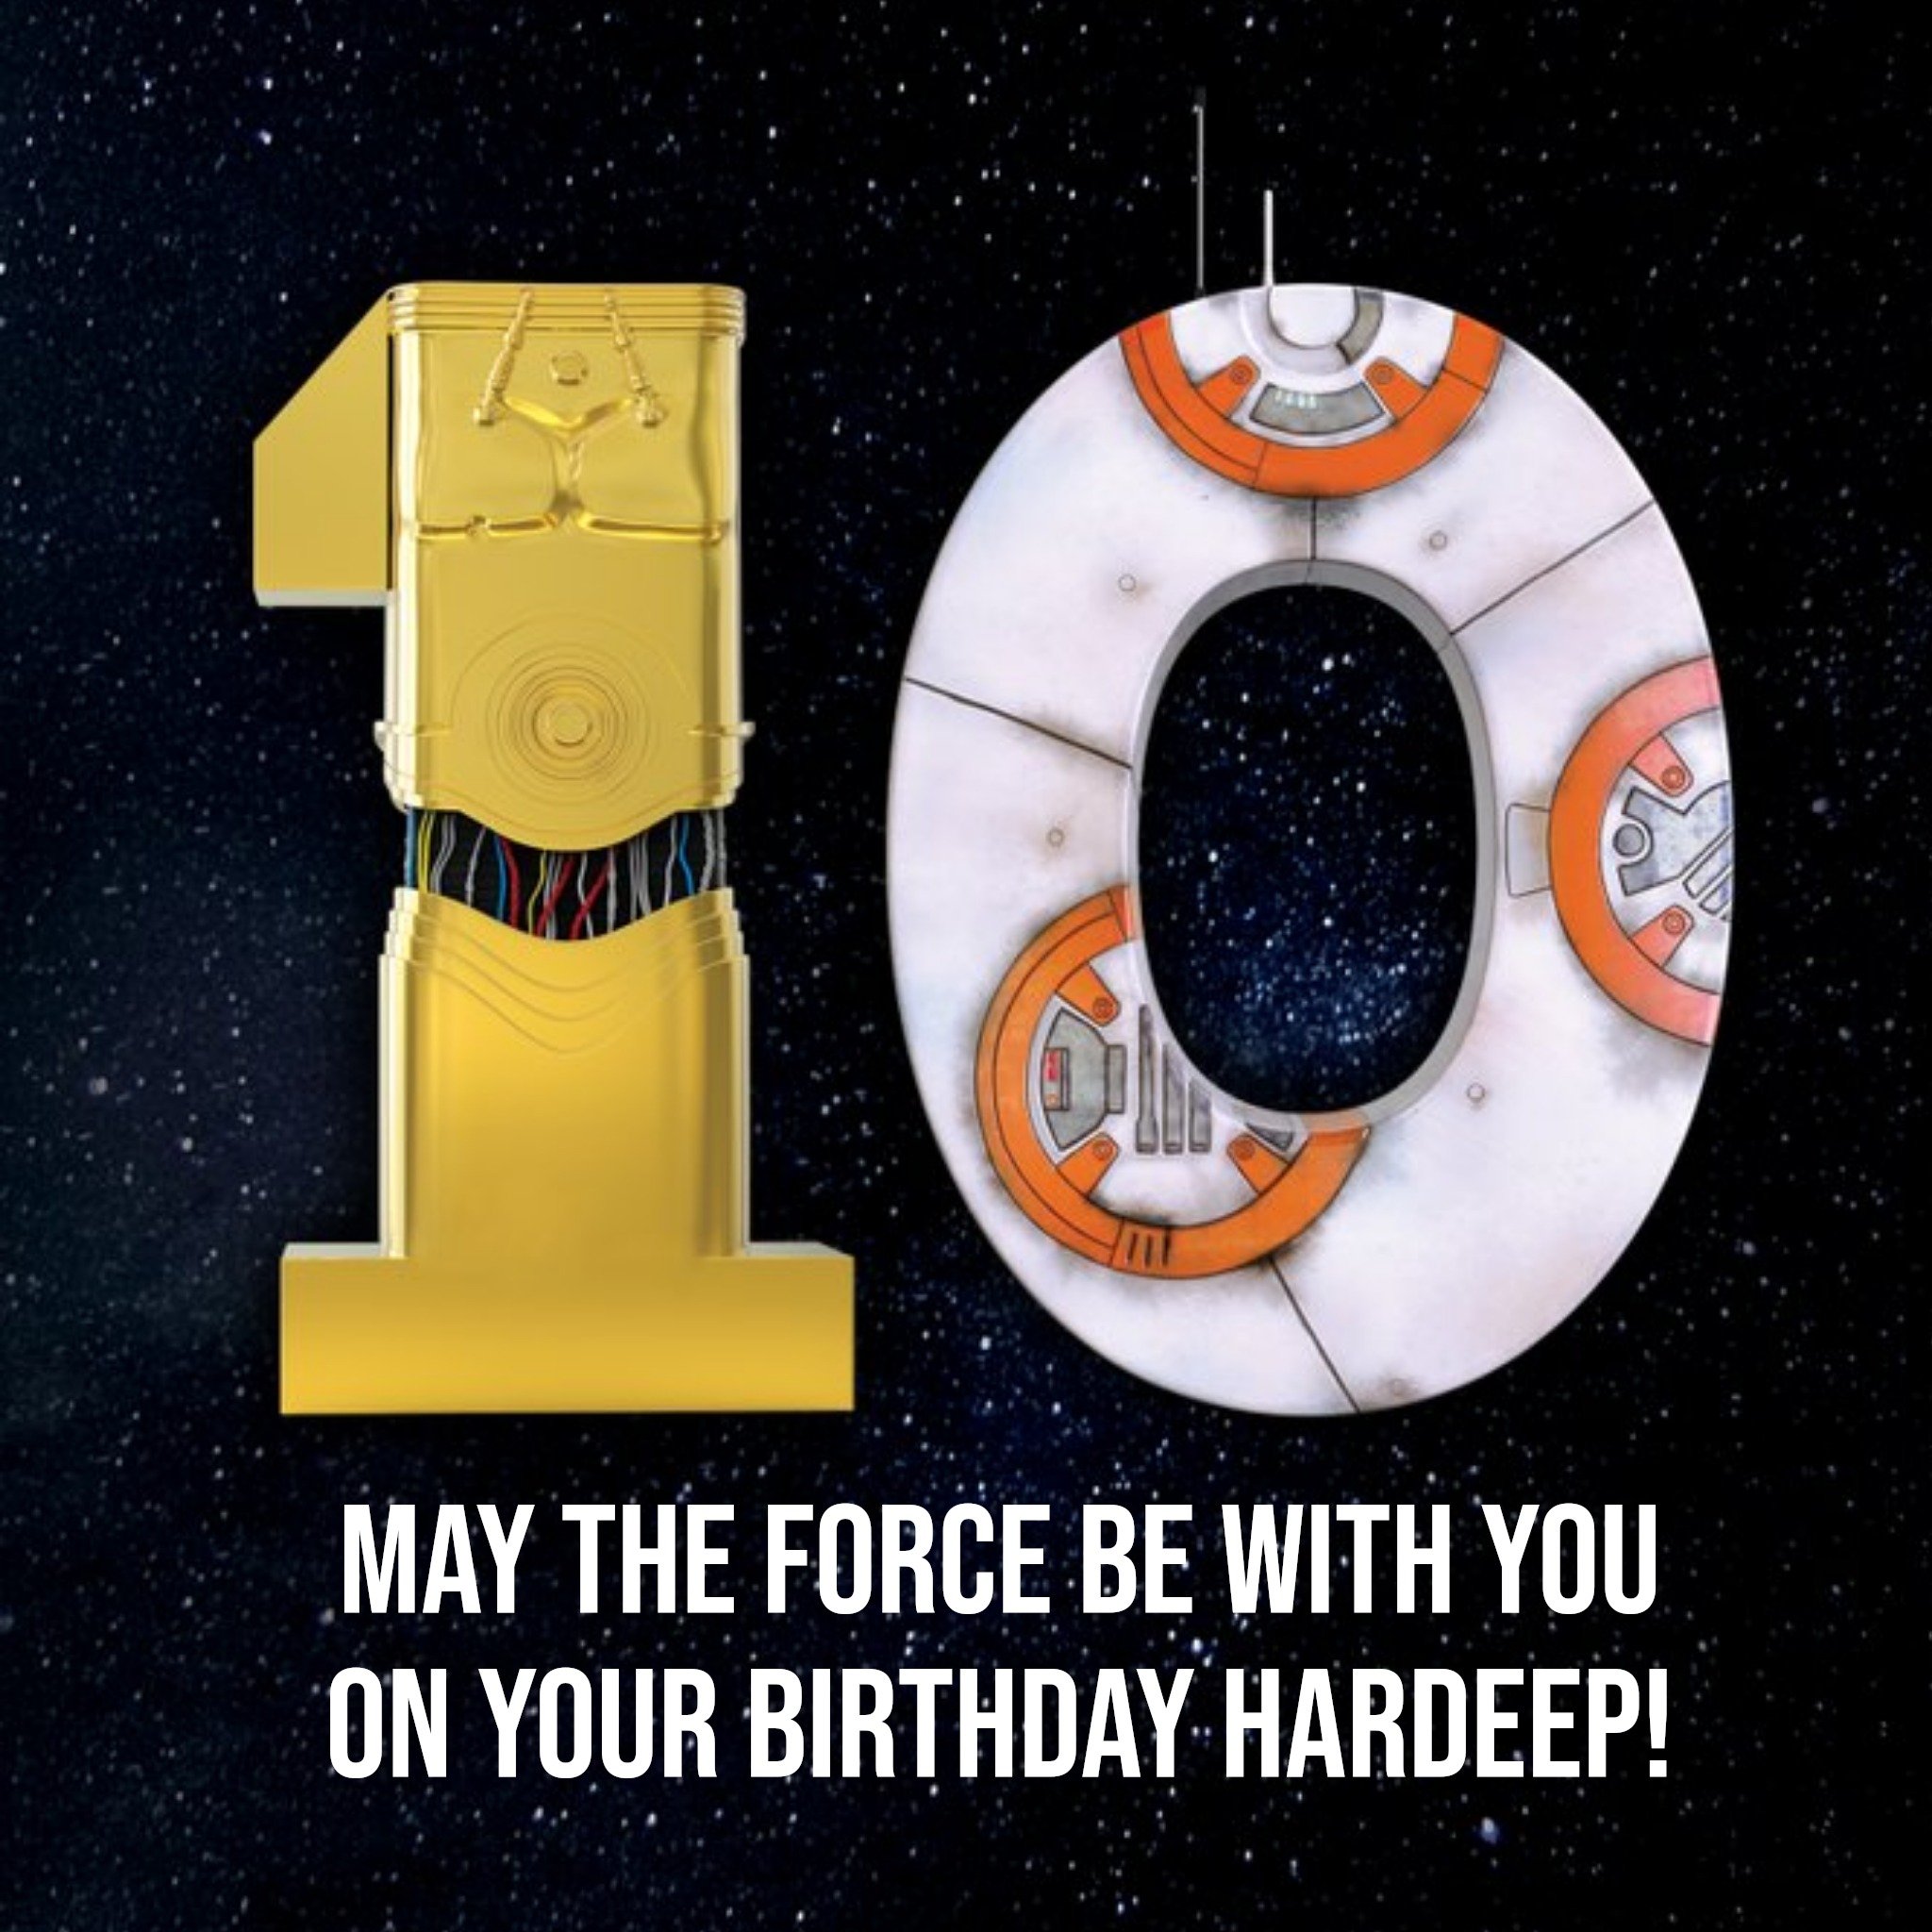 Disney Star Wars May the Force Be With You 10th Birthday Card, Large